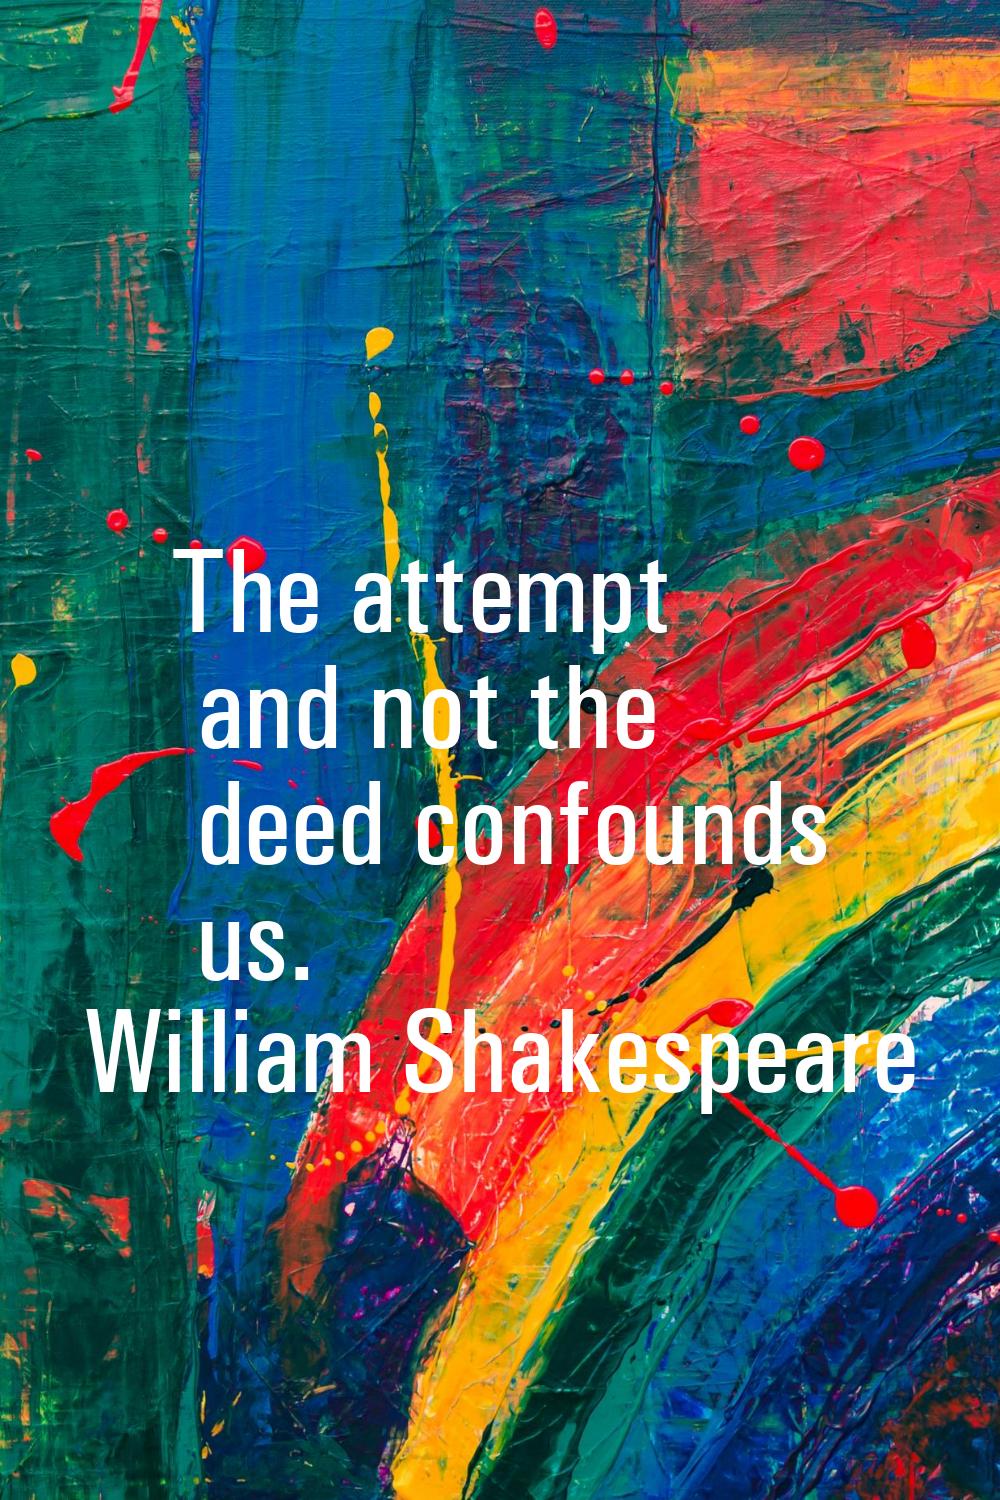 The attempt and not the deed confounds us.